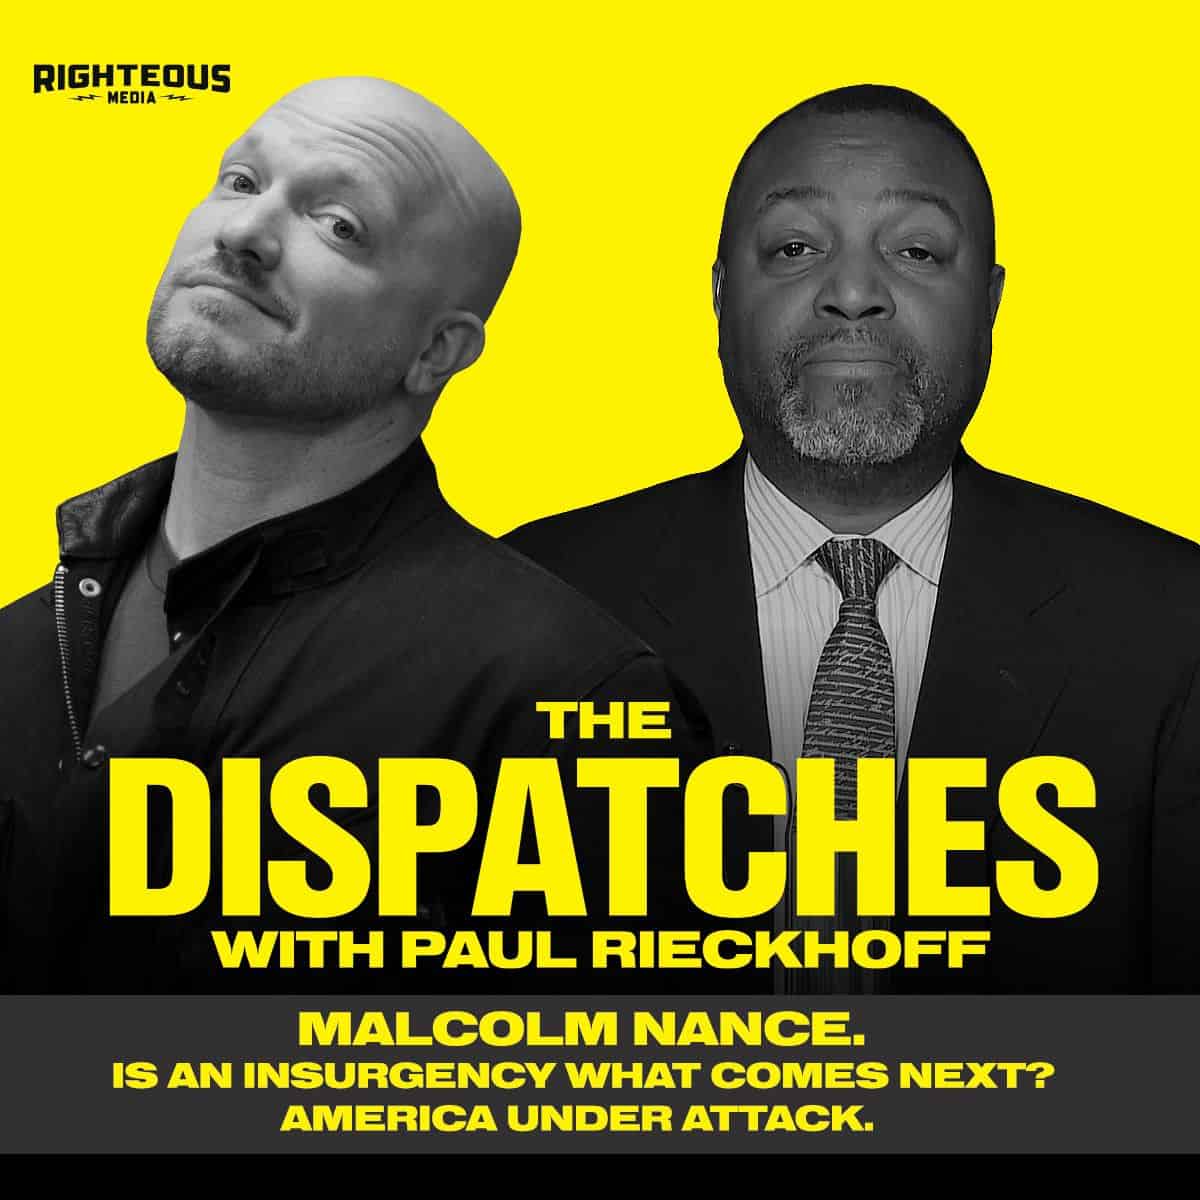 94. DISPATCH SPECIAL: Malcolm Nance. Is An Insurgency What Comes Next? America Under Attack.